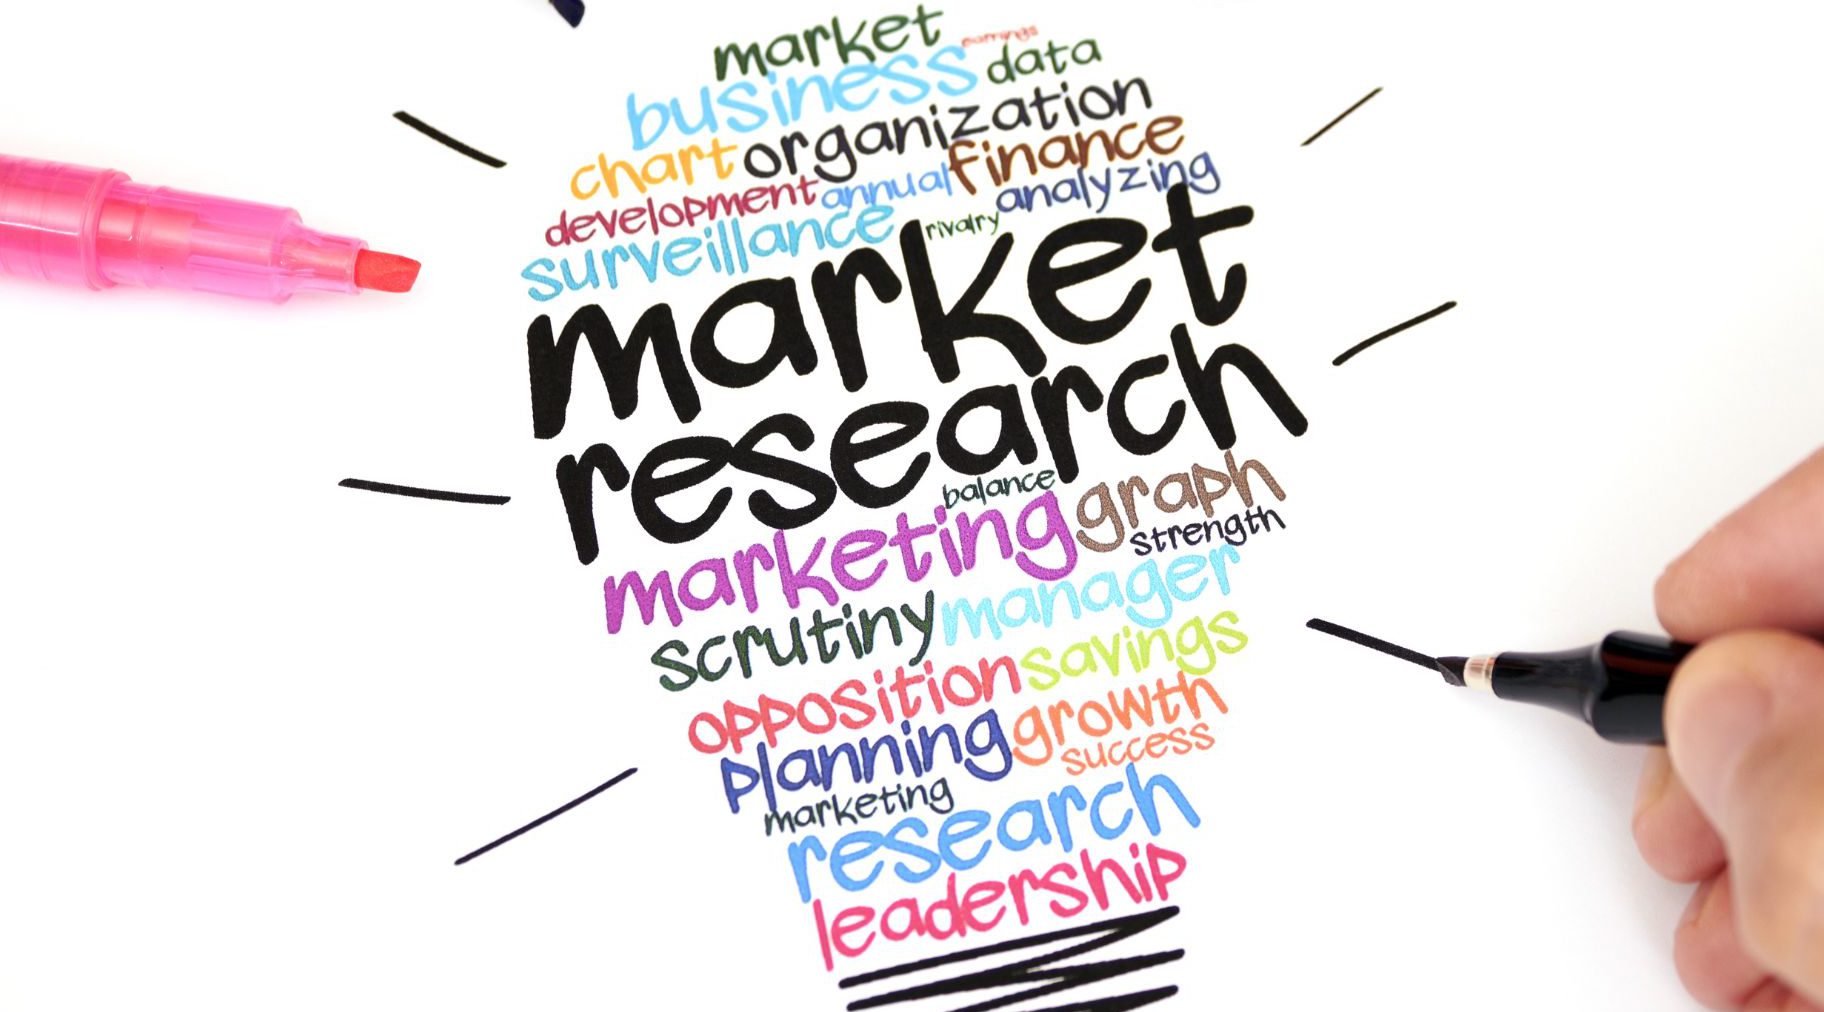 Market Research Services Market Report